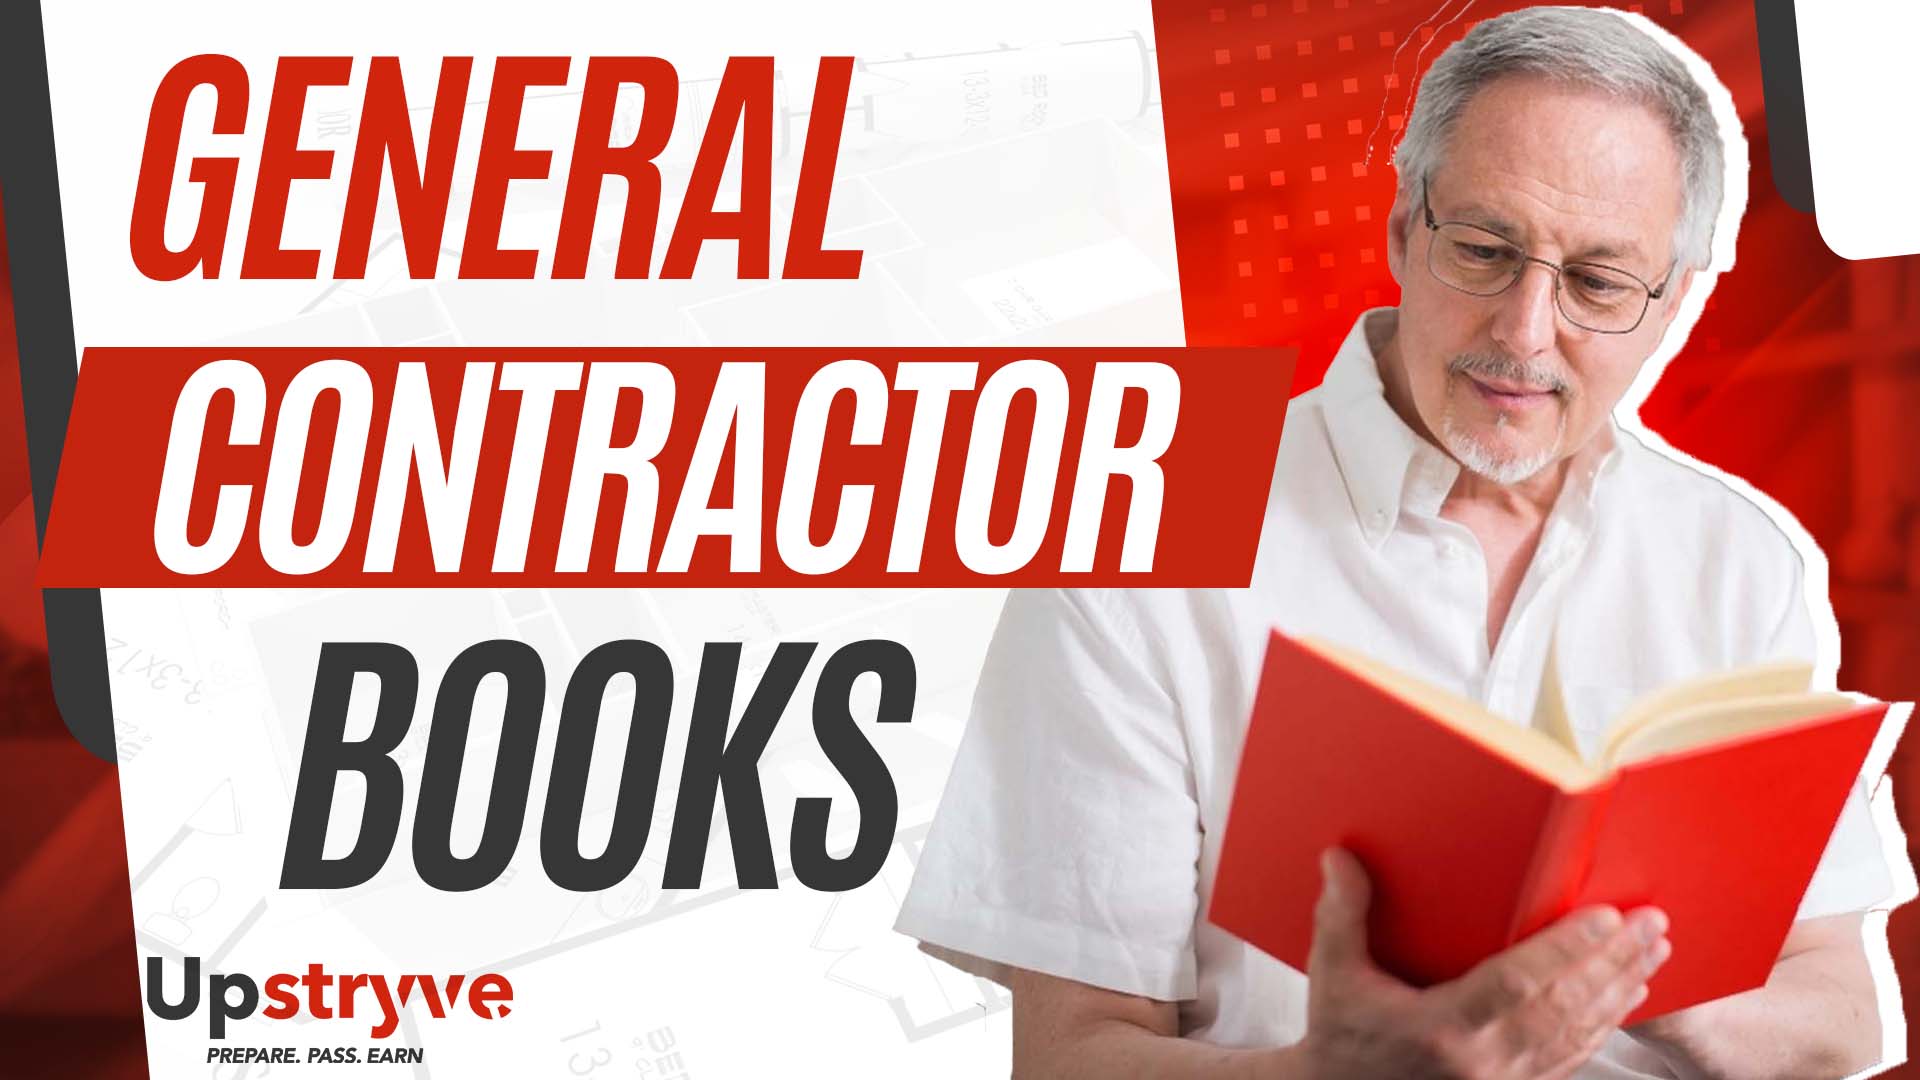 Are you preparing to take you General Contractor license exam, but don't know which books you need to purchase and study? Let Upstryve experts like J.D. Myers help you find the correct books so you can save money and time. General Contractor exam books can be expensive and hard to find. Here at Upstryve we make sure you purchase only the books you need and nothing more. We also make sure you purchase the correct editions so you can study with the correct material. Call us today at 561-229-1418 and get started on your journey to getting you General Contractor license by purchasing the correct general contractor exam books.